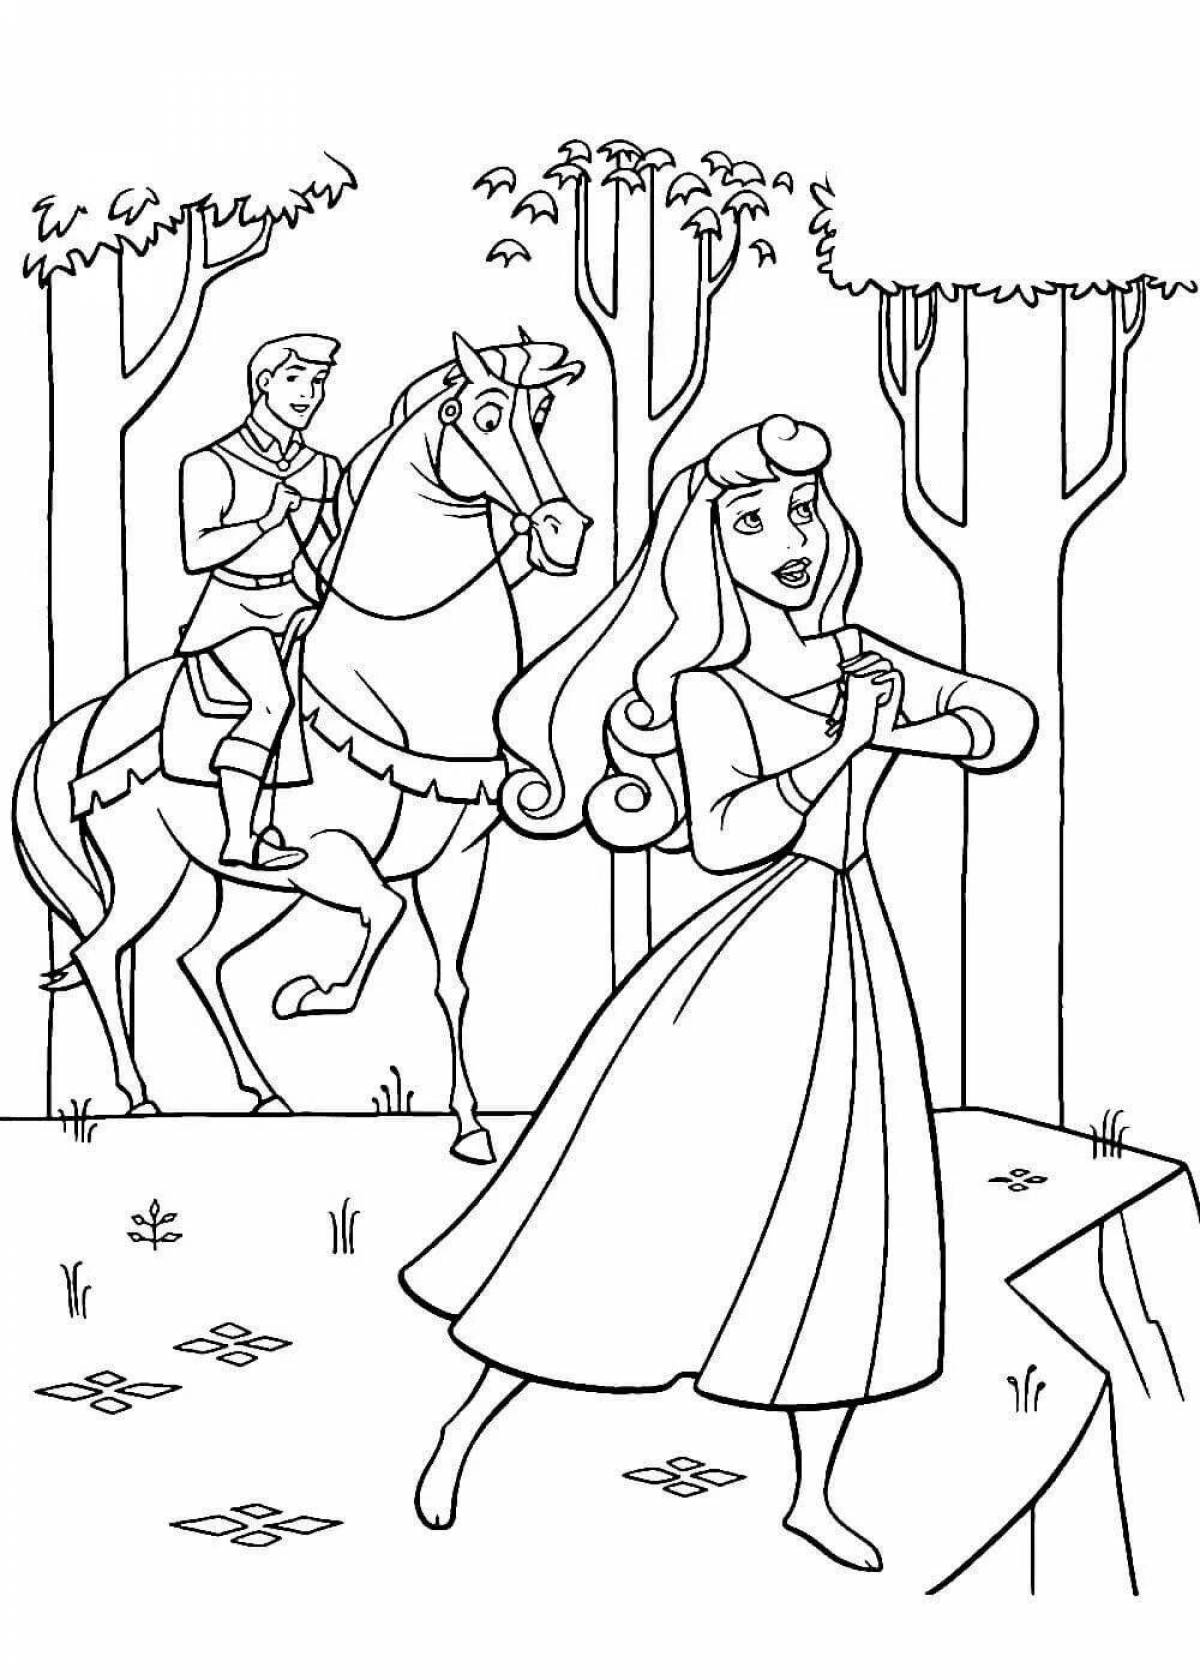 Hypnotic sleeping beauty coloring book for kids